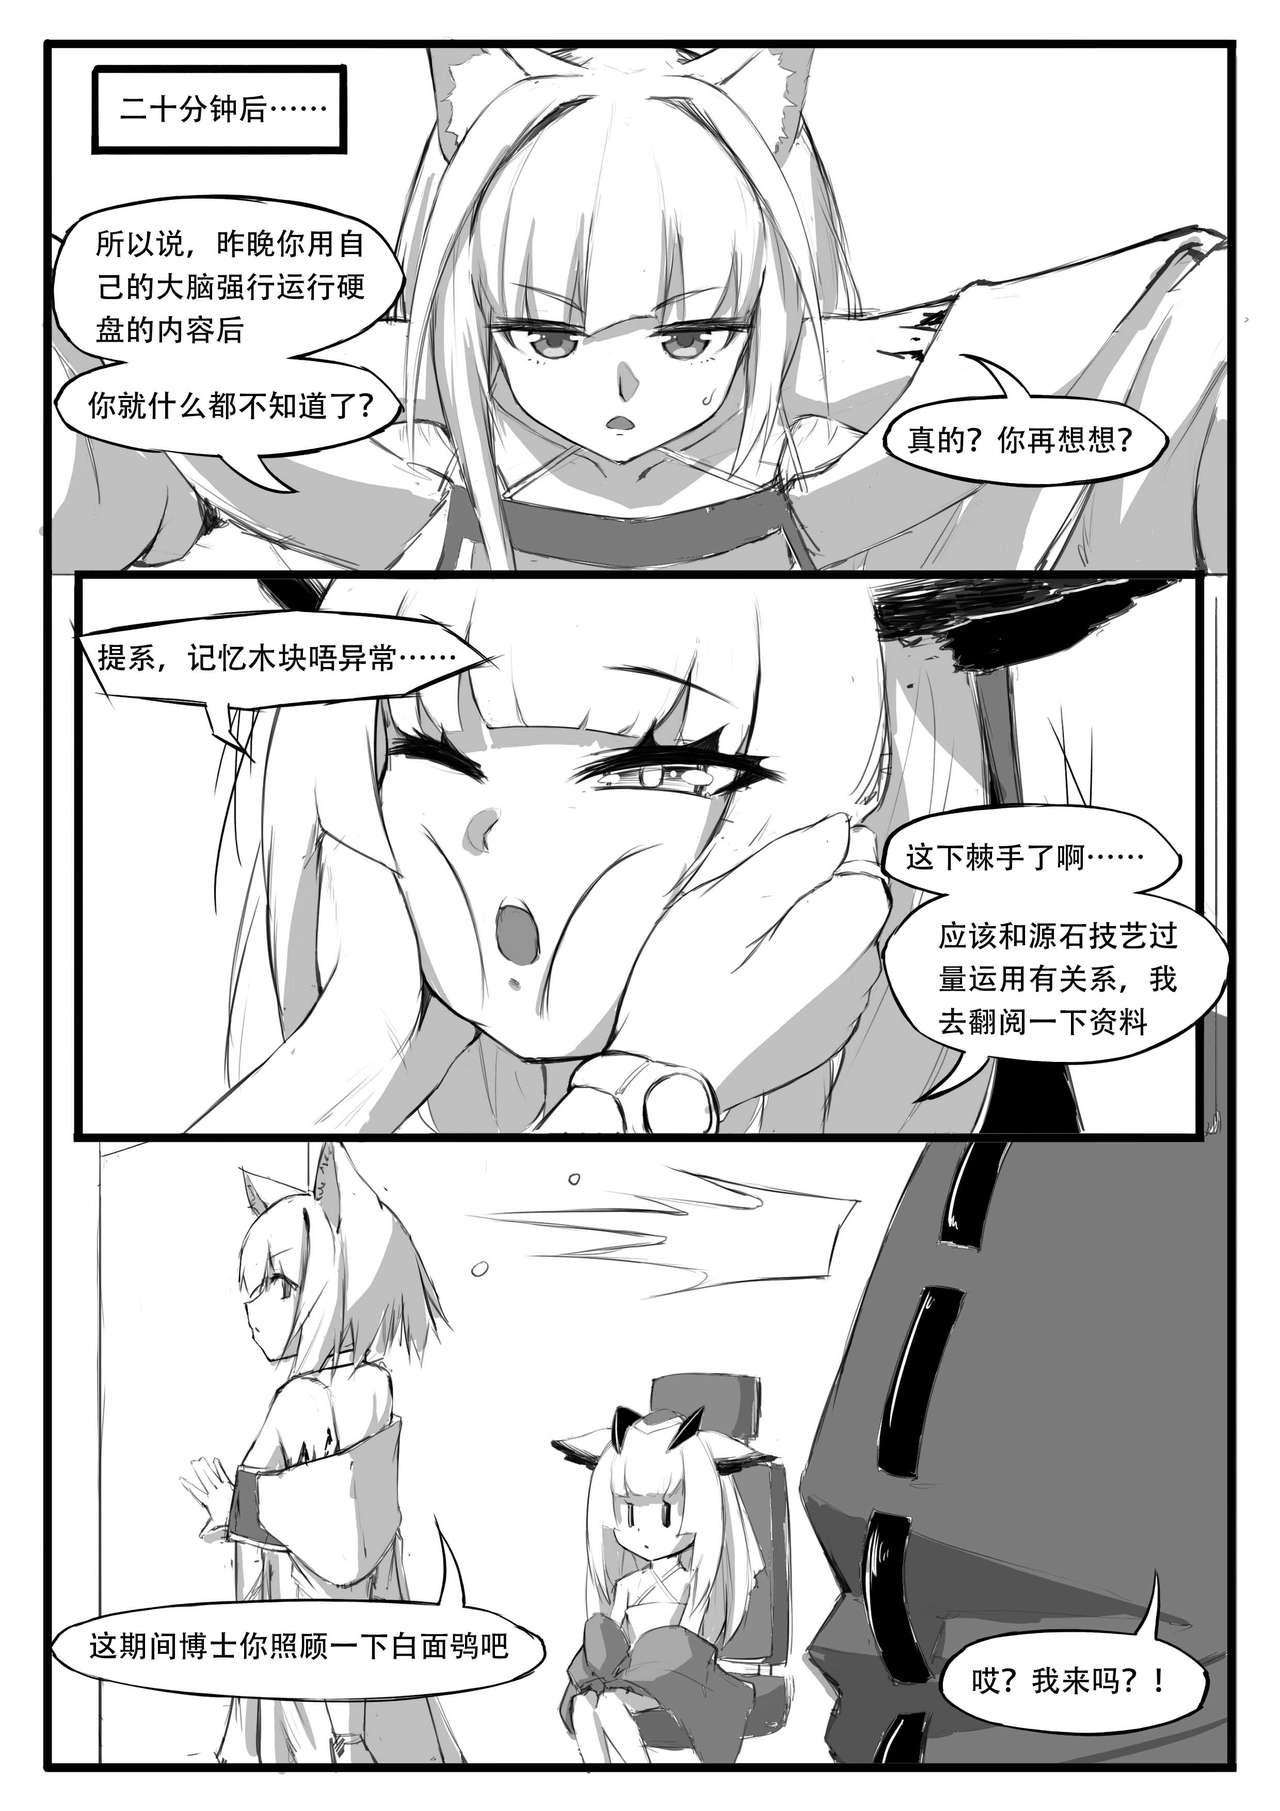 [saluky] 关于白面鸮变成了幼女这件事 (Arknights) [Chinese] page 10 full